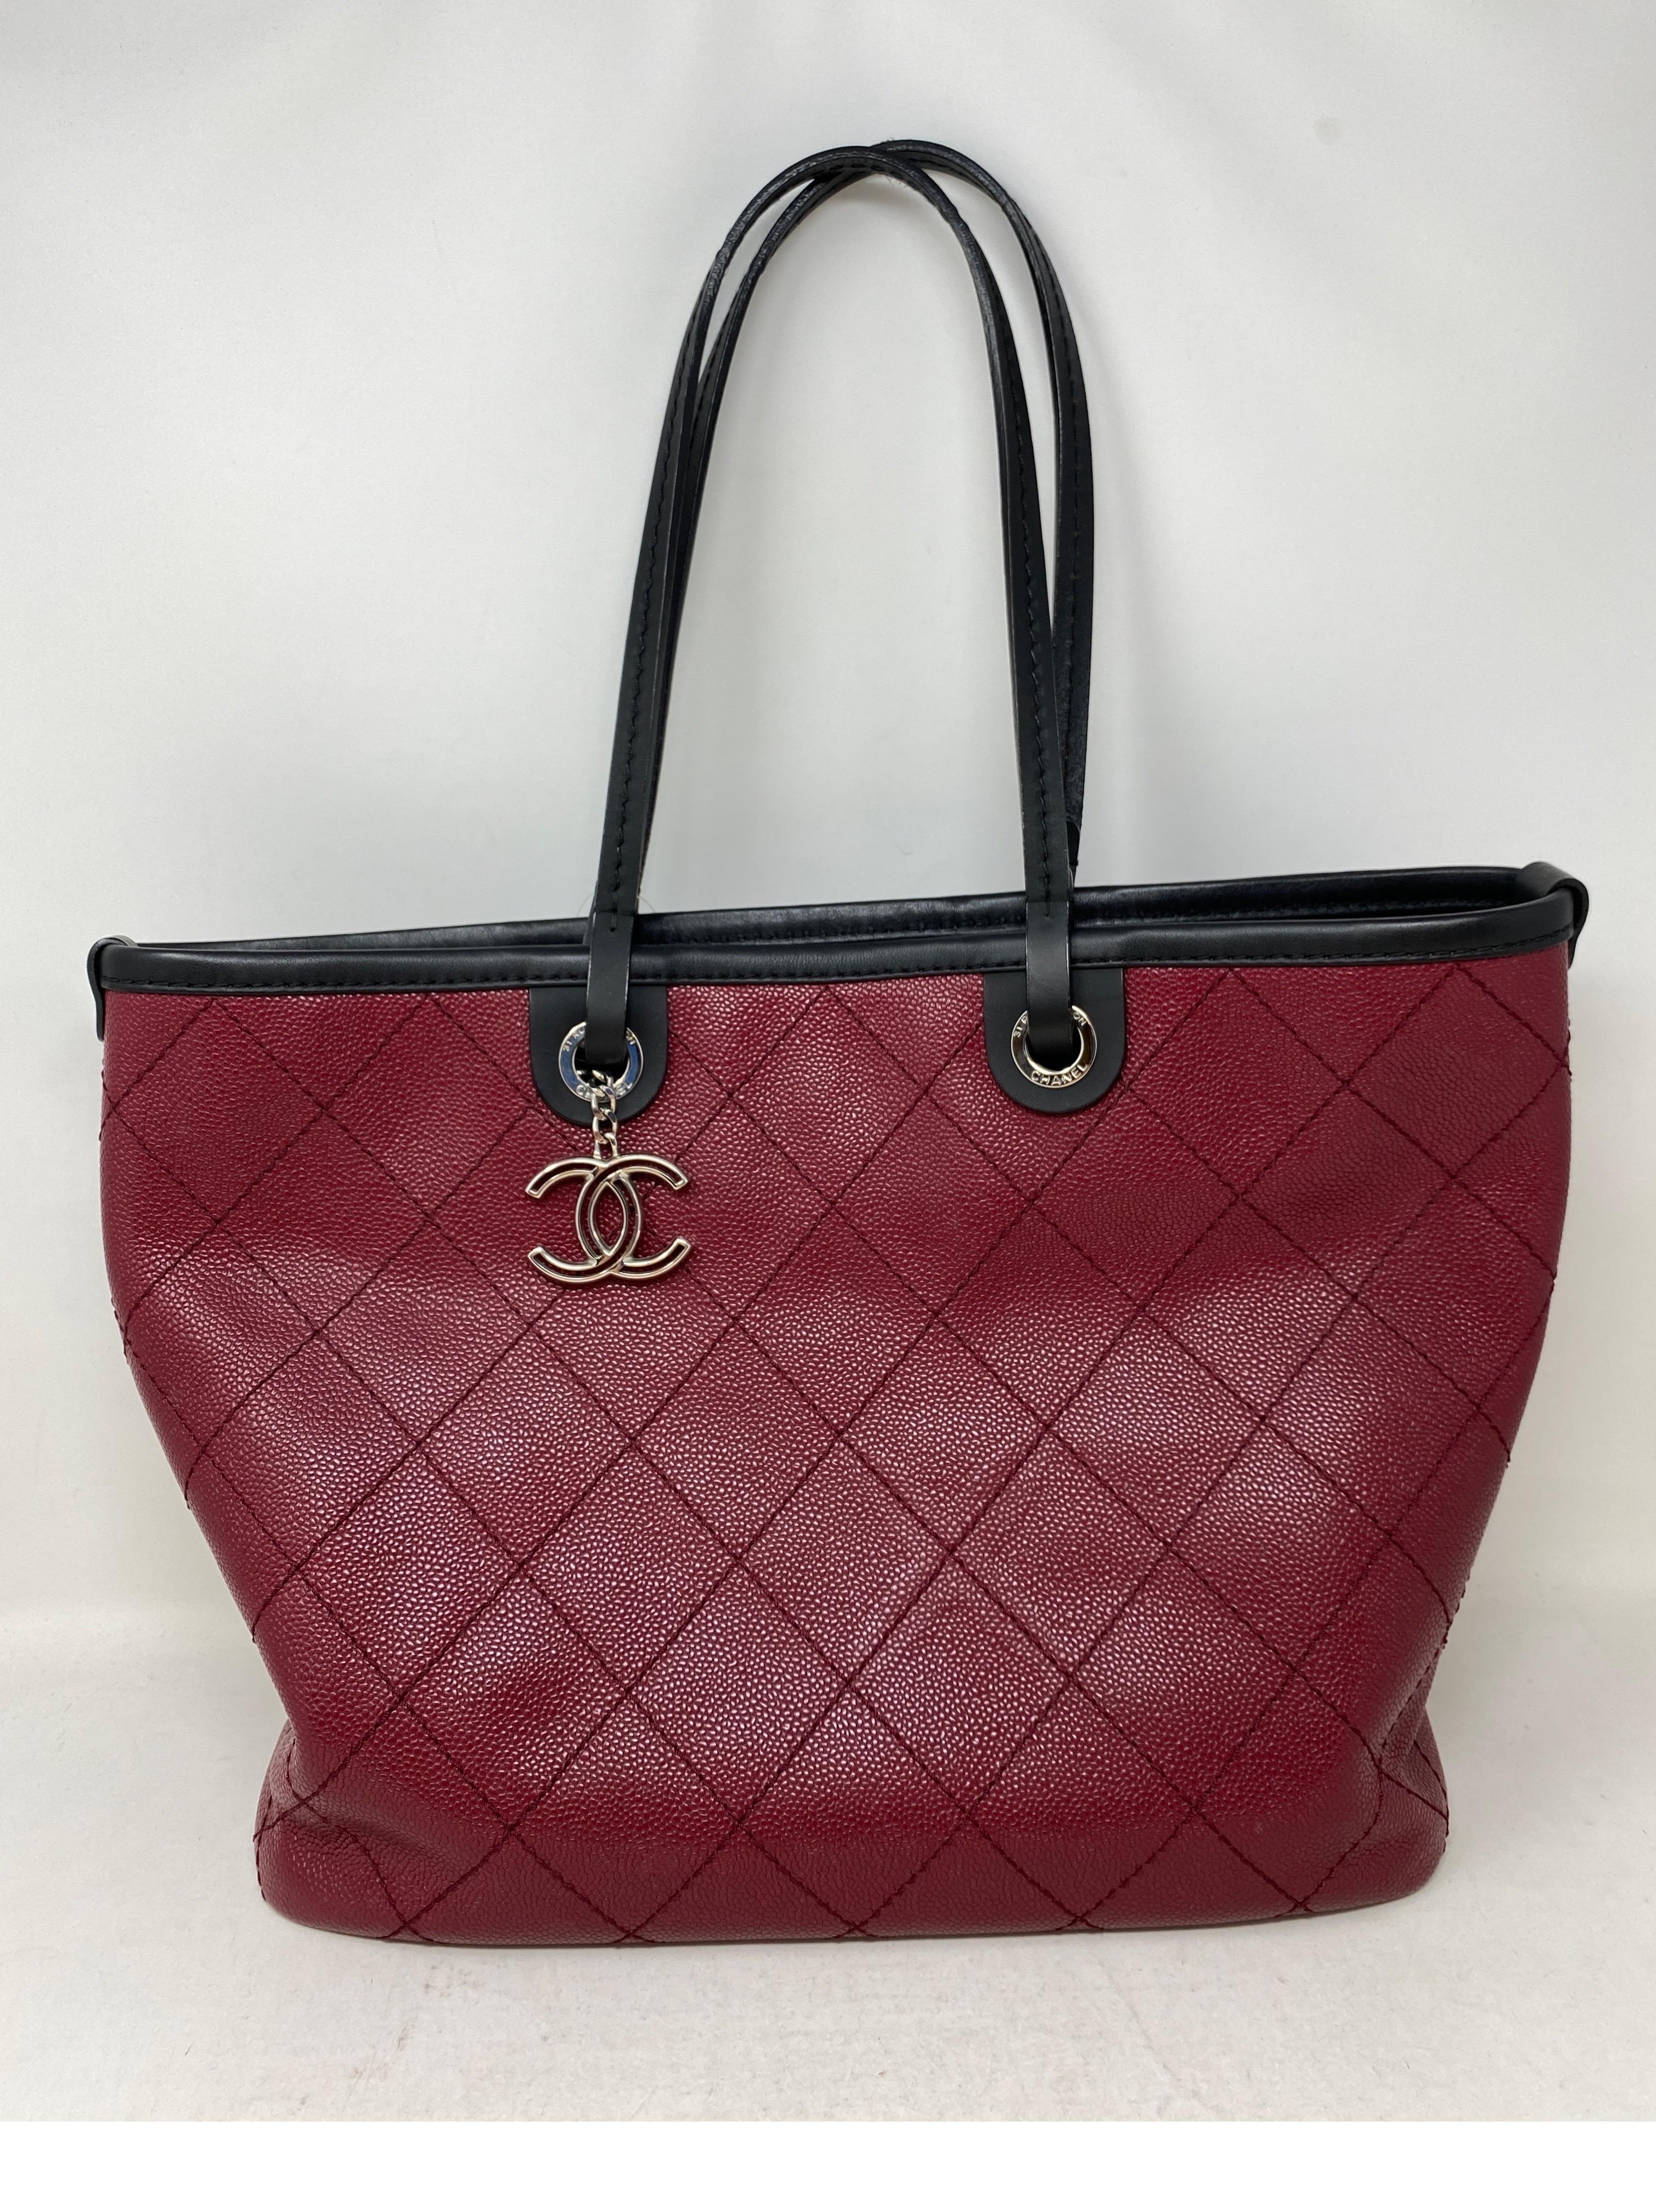 Chanel Burgundy Tote Bag. Caviar leather. Excellent condition. Tote bag includes leather pouch inside. Great tote bag for everyday and travel. Interior clean. Navy interior. Guaranteed authentic. 